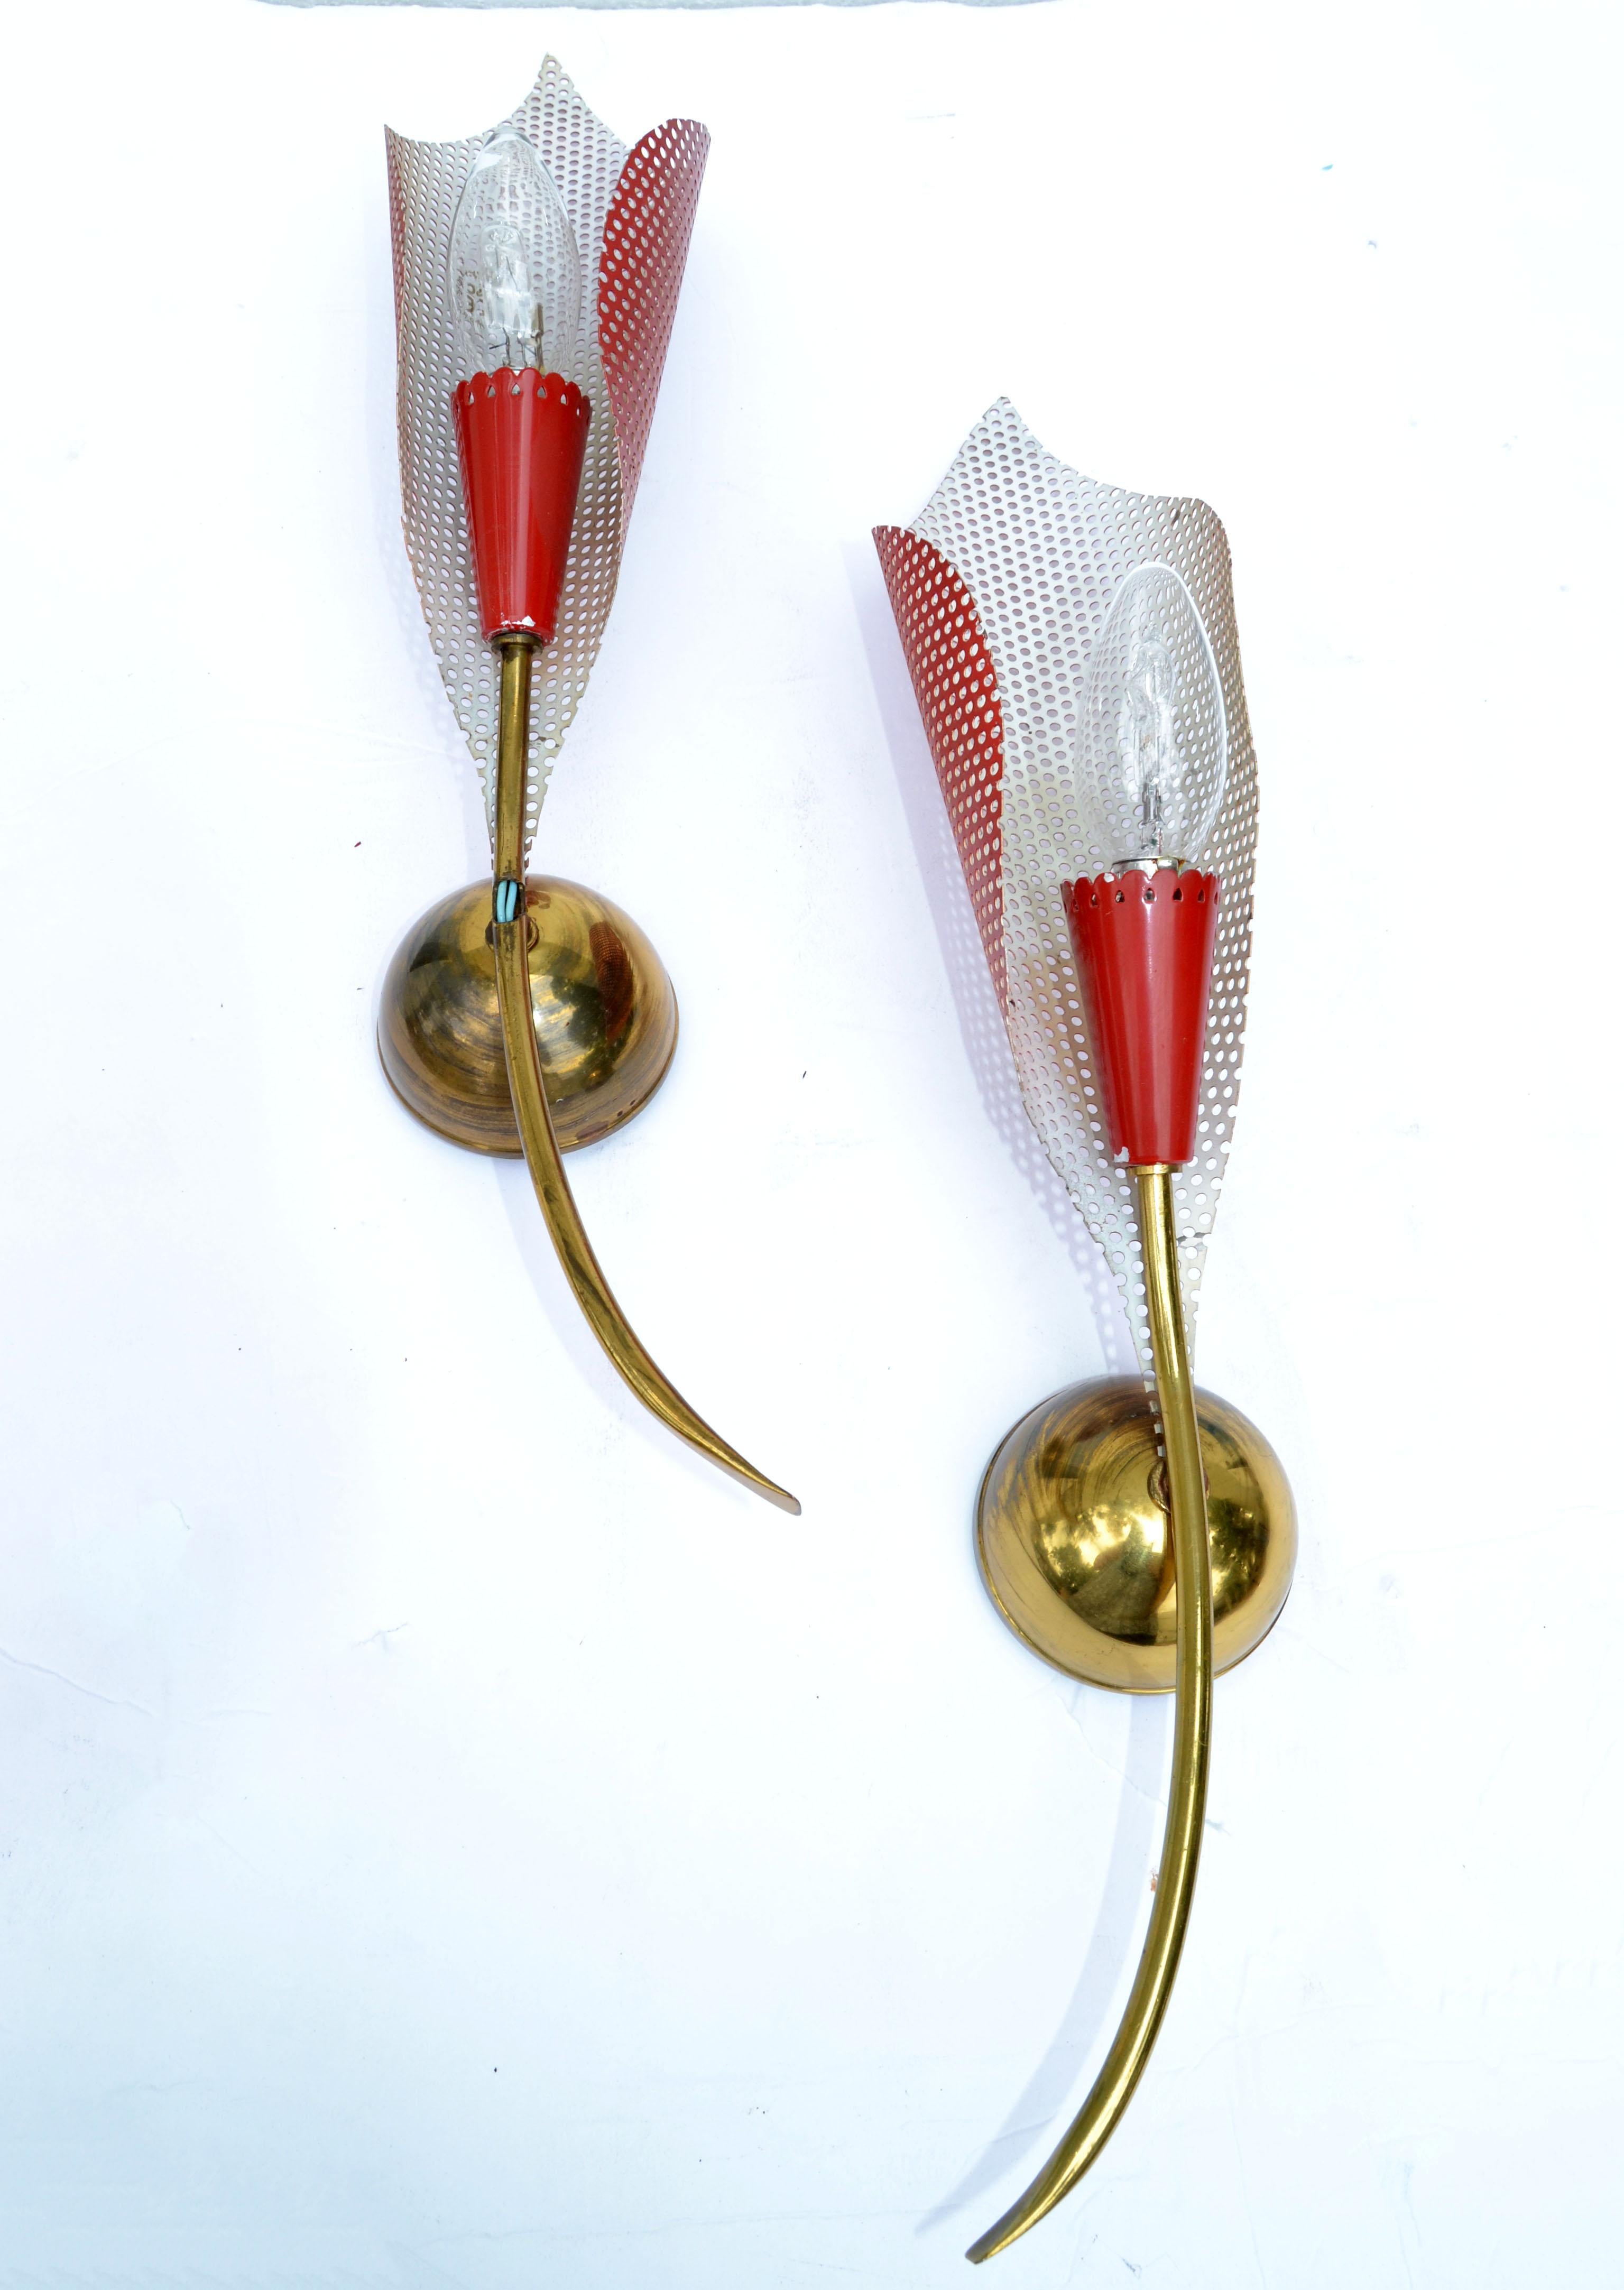 Pair of superb French Mid-Century Modern Mathieu Matégot sconces, wall lamps from the 1960.
Metal mesh shades in red & white finish.
US rewired and each socket takes one light bulb max. 60 watts.
Back Plate: 3 inches Diameter, Projection from